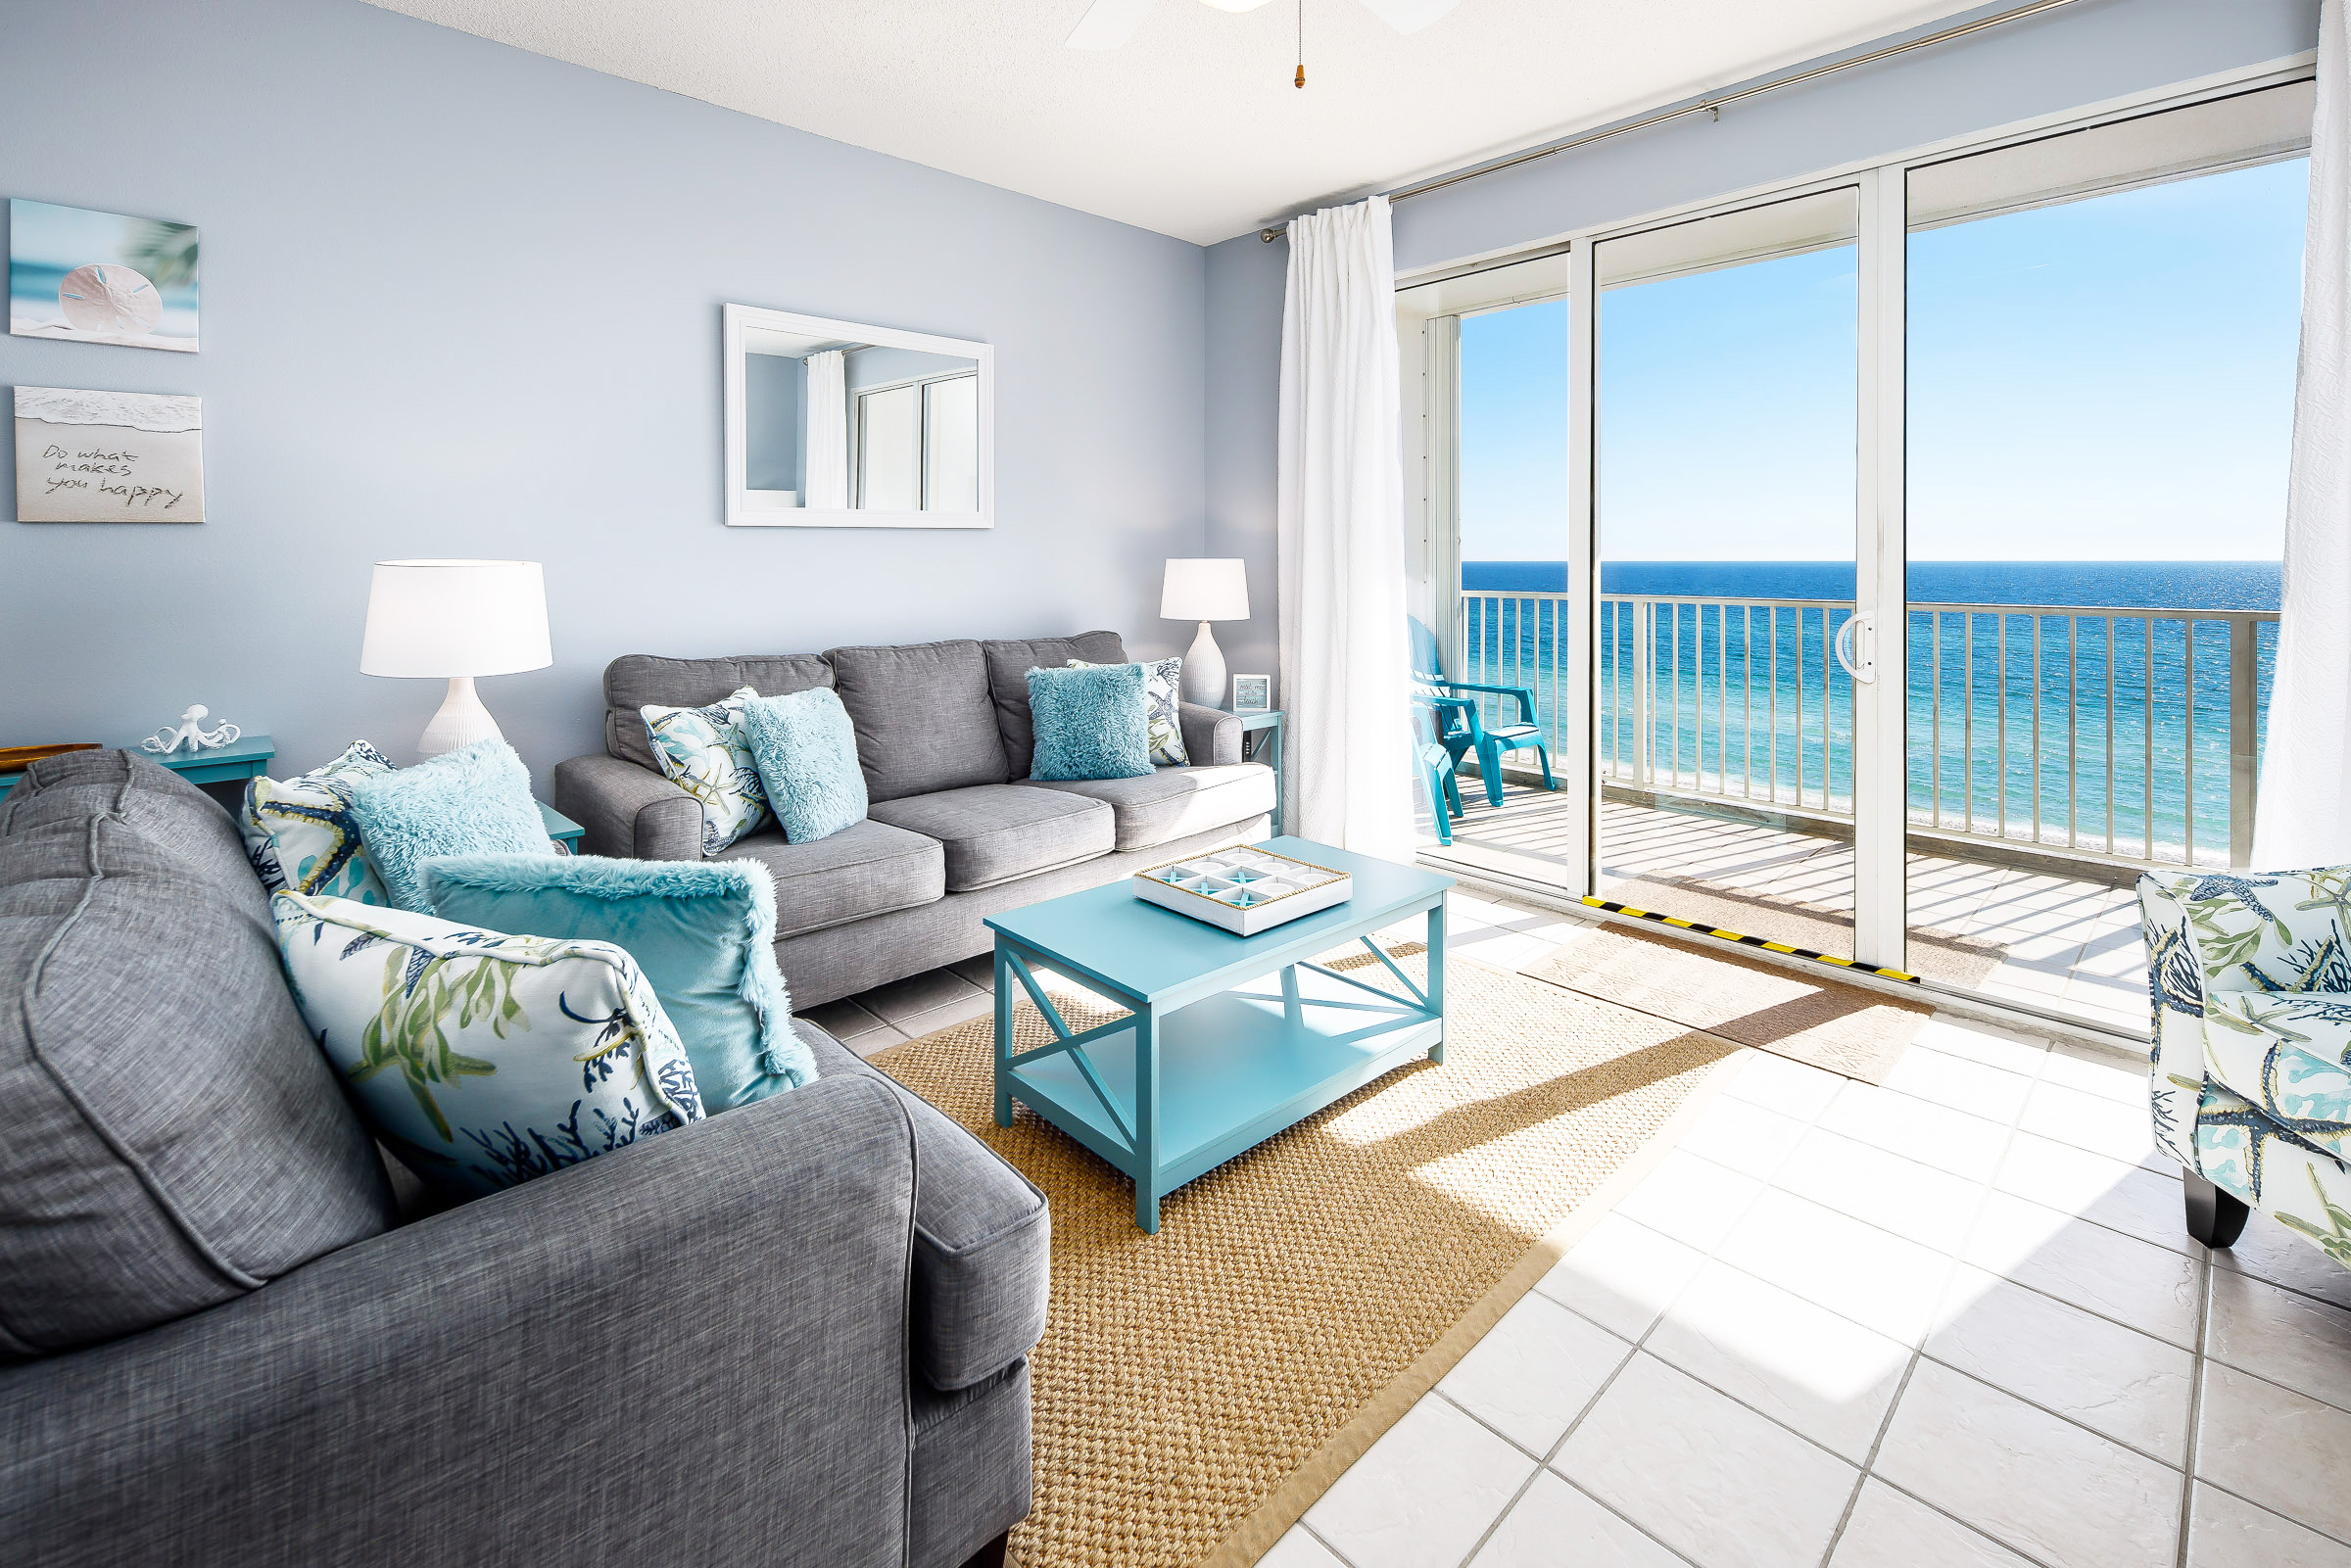 Property Management Company in Okaloosa Island For Walton Beach FL Vacation Rentals by Sunset Resort Rentals